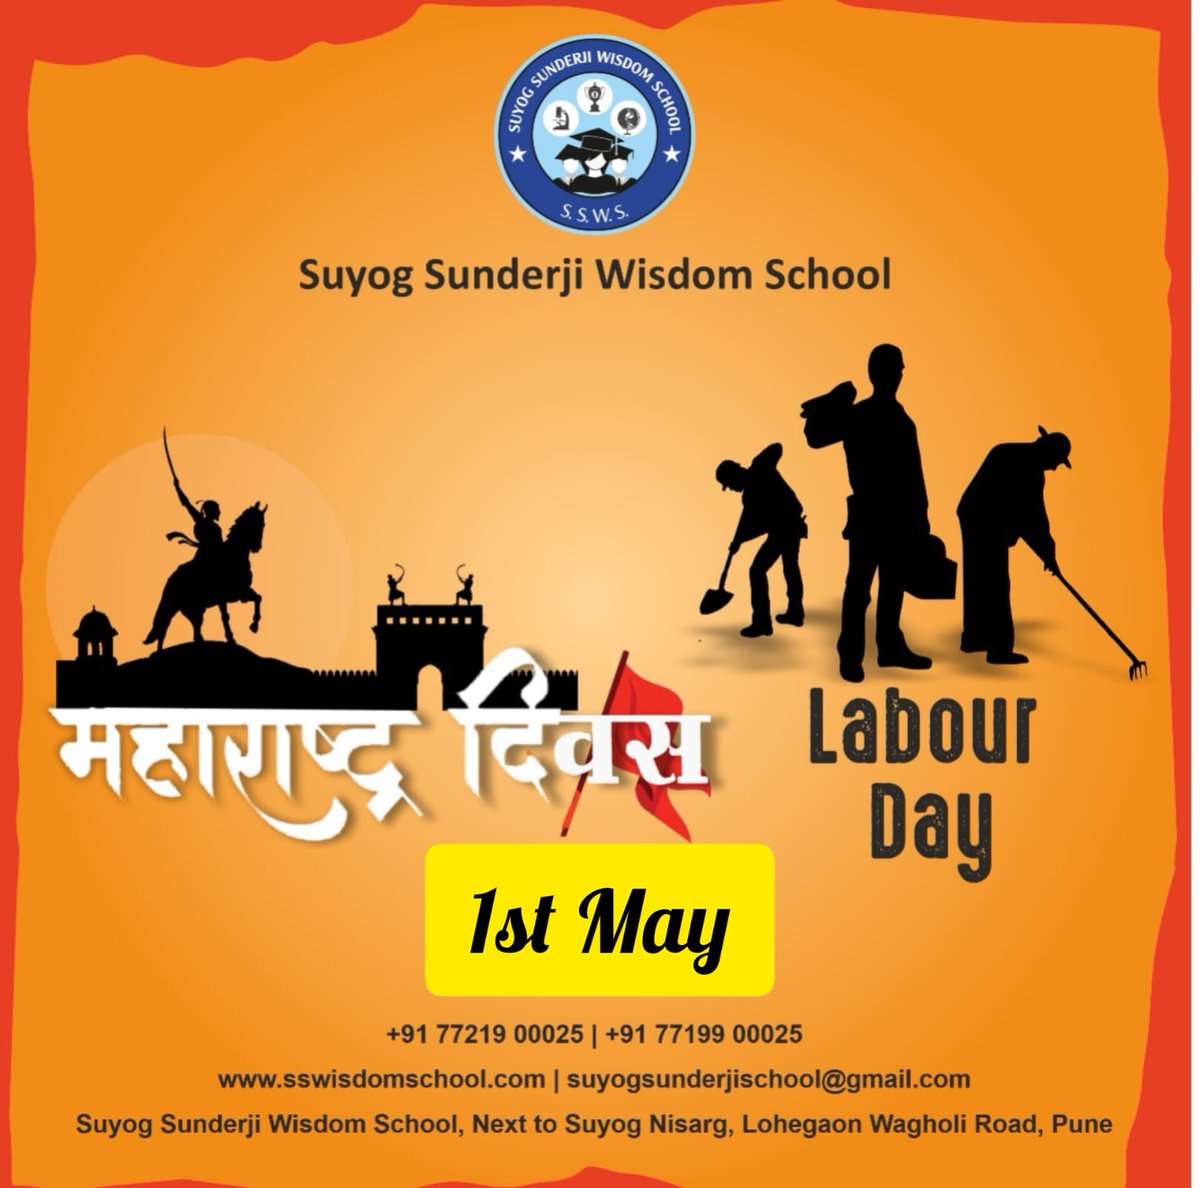 Let's celebrate Maharashtra Day & Labor Day by cherishing state’s diversity and honoring people working towards its progress.

#MaharashtraDay #maharashtra #marathi  #maratha #laborday #labordayweekend #happylaborday #labor  #labourday #workers